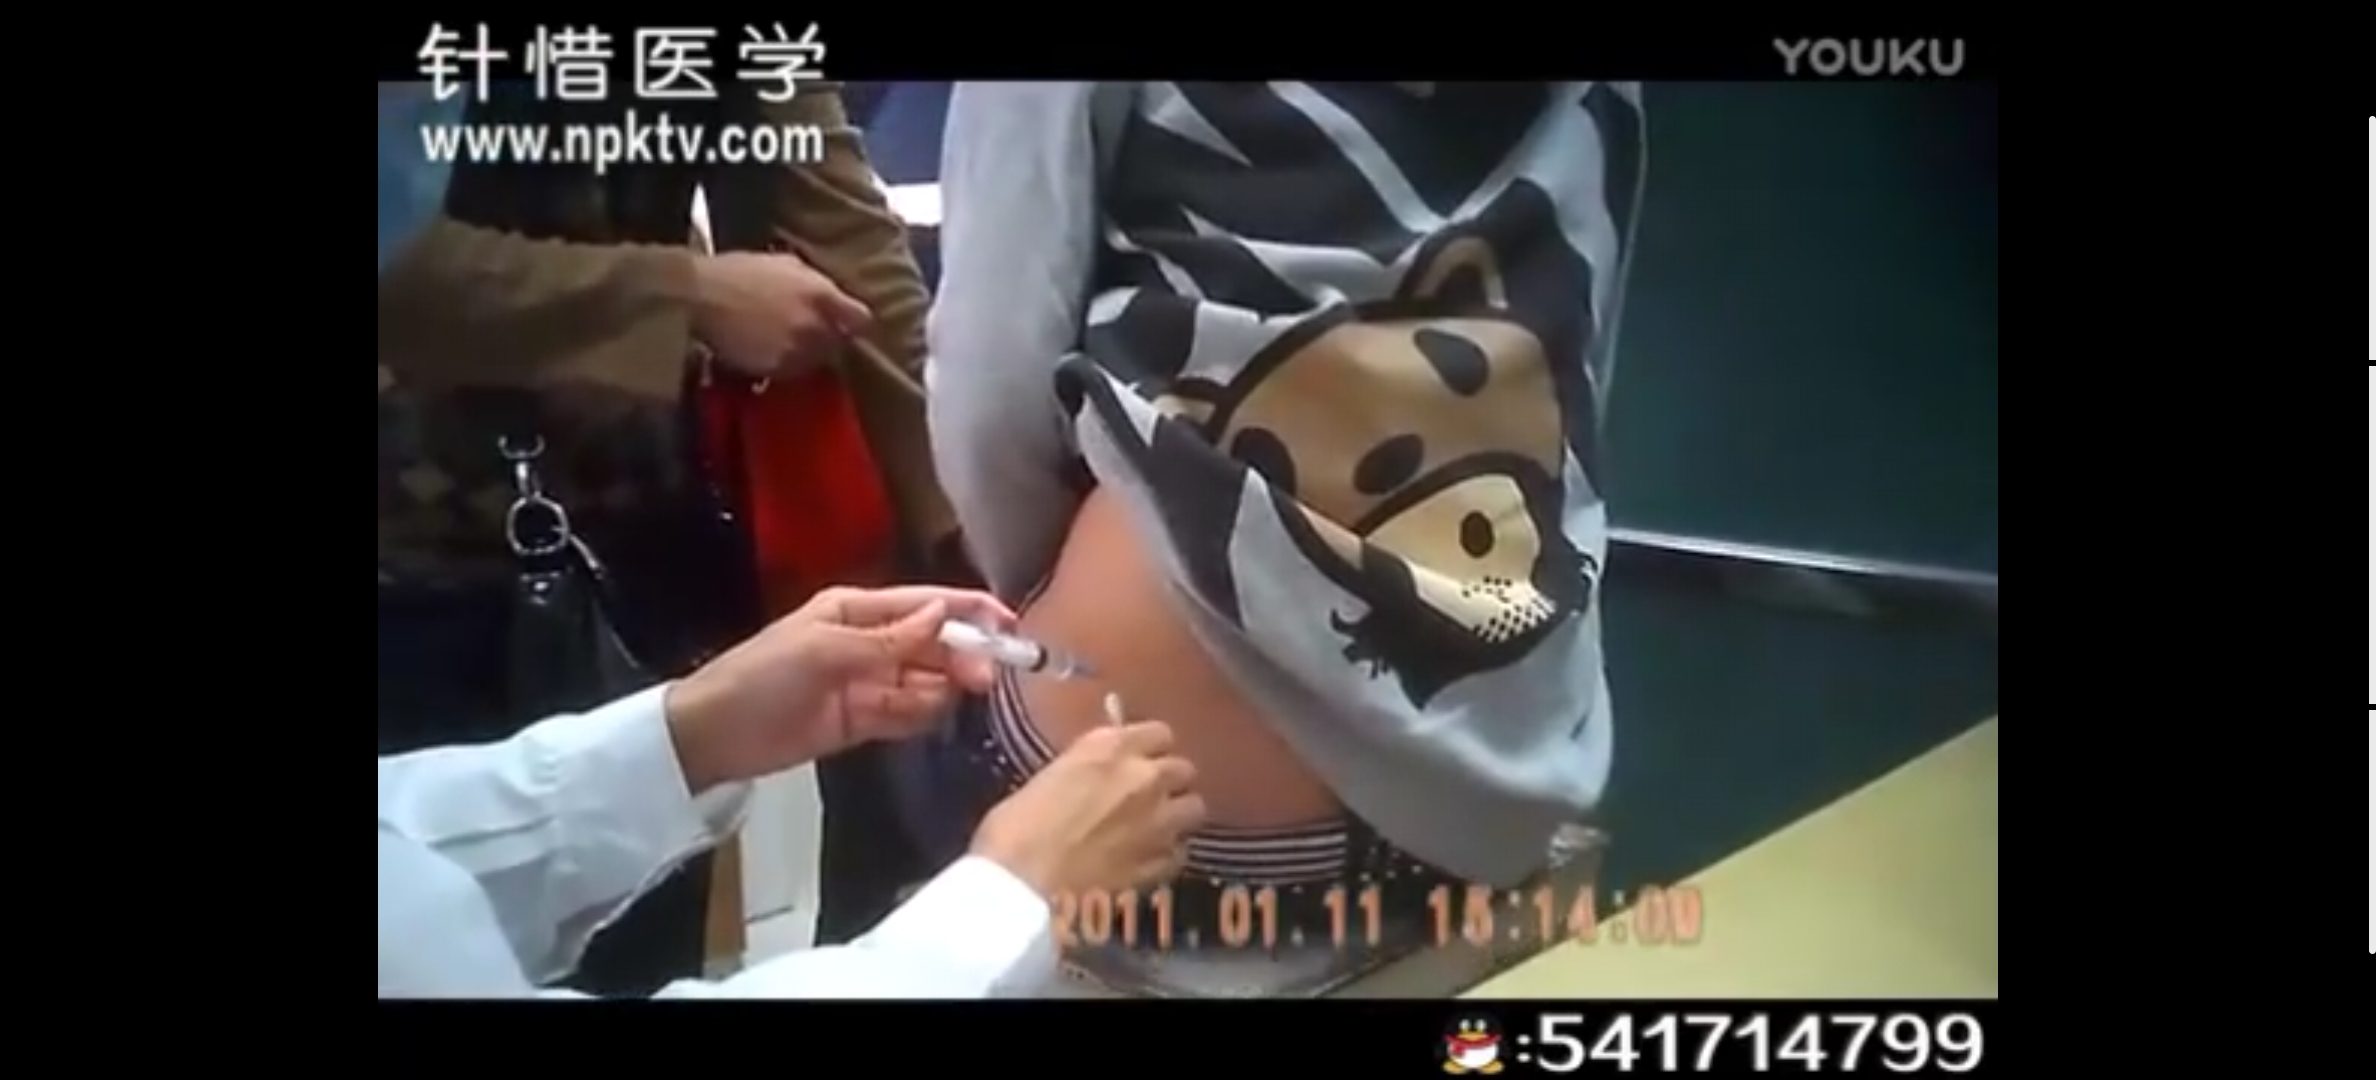 Chinese injection - video 3